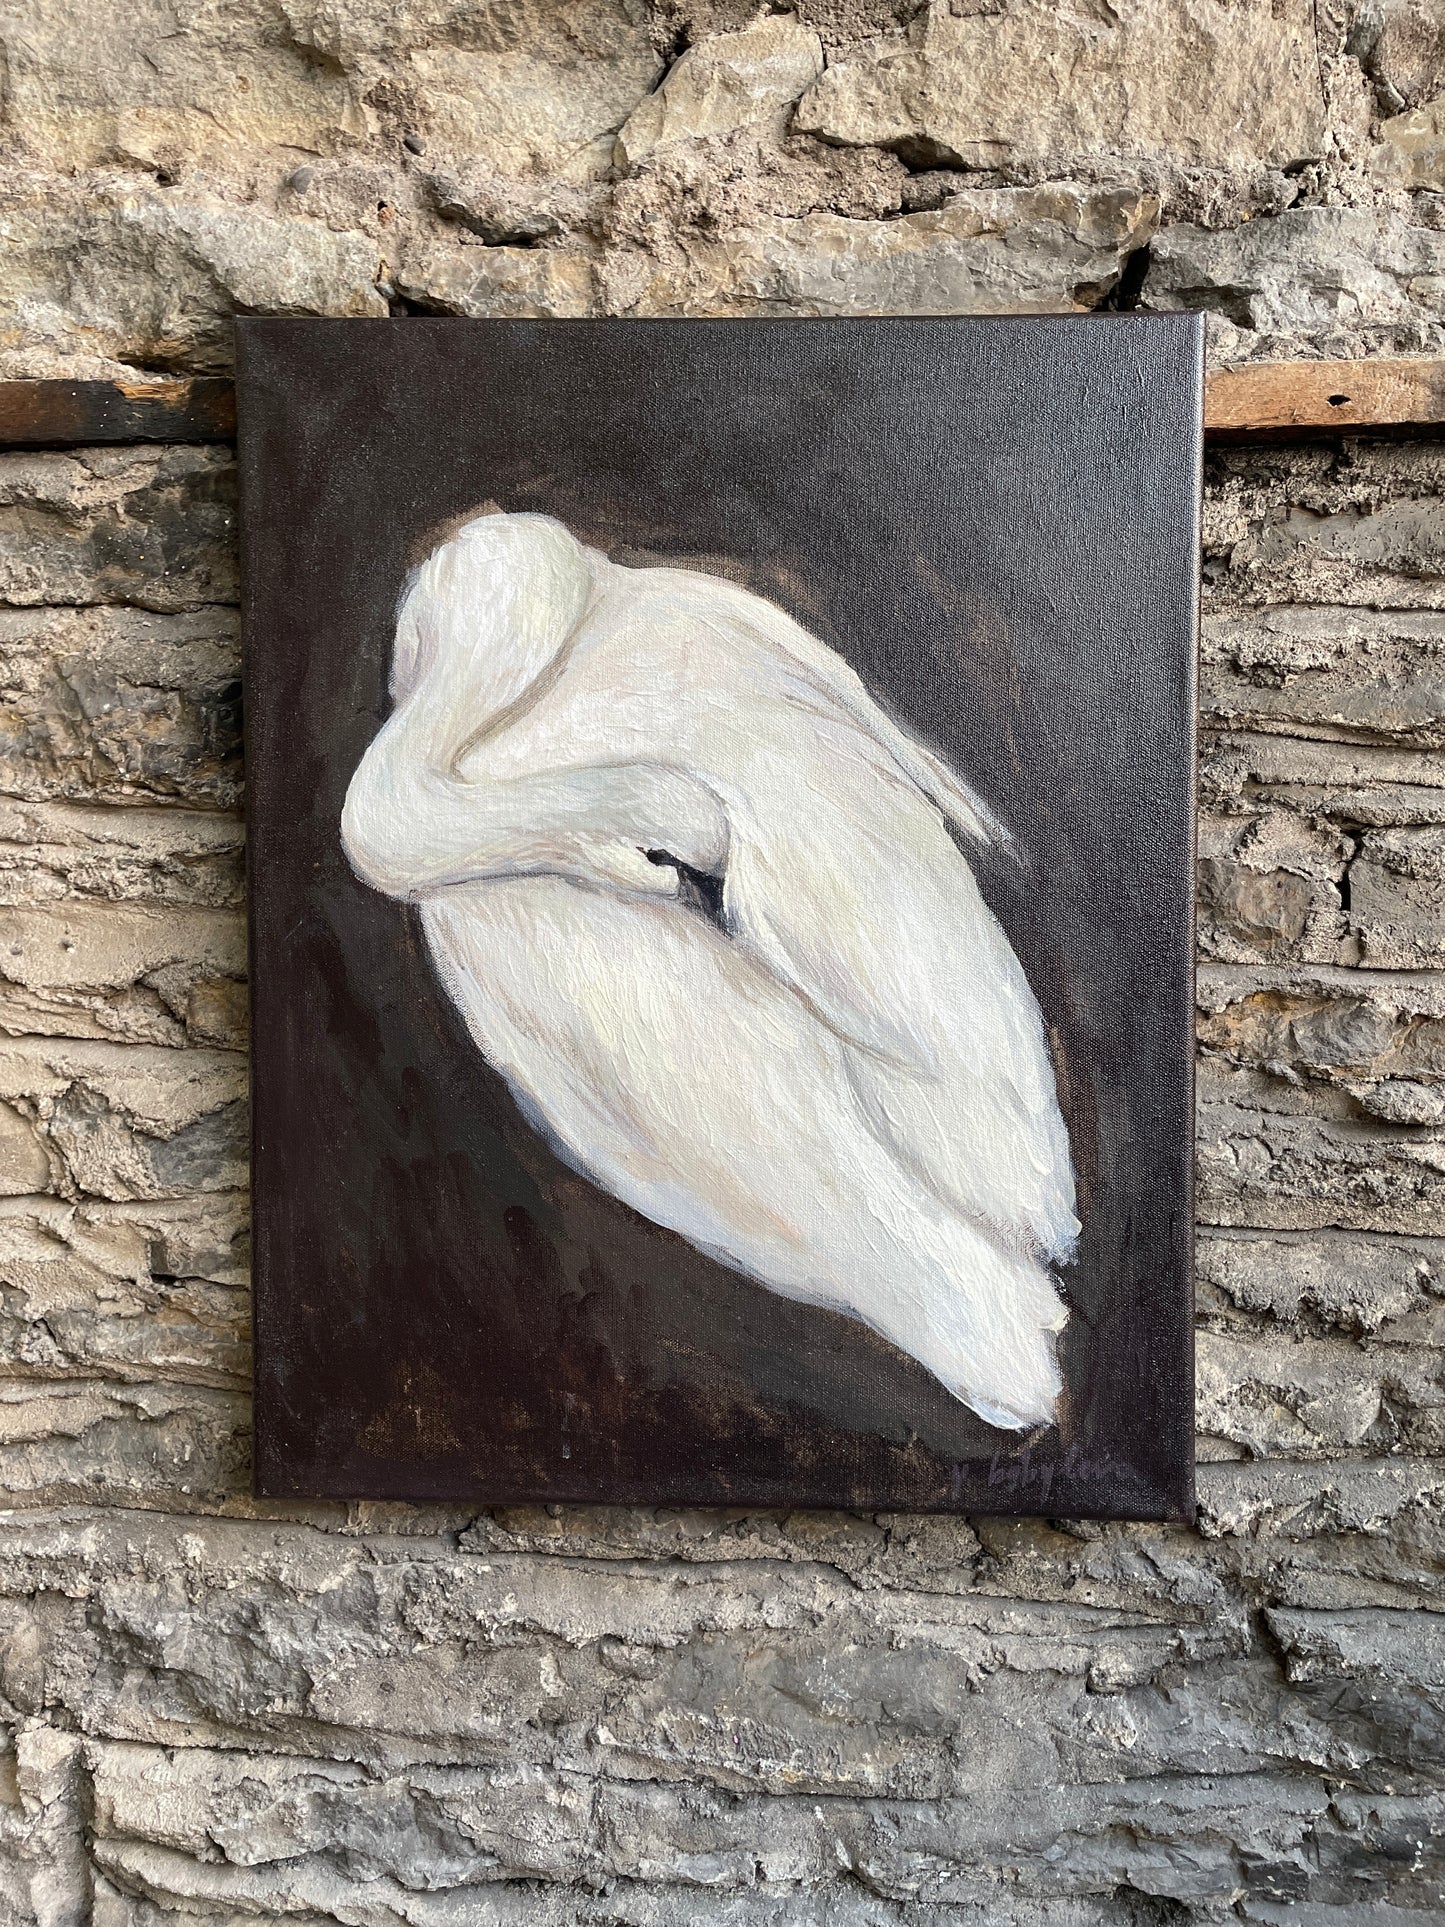 X SOLD "Baby Swan"